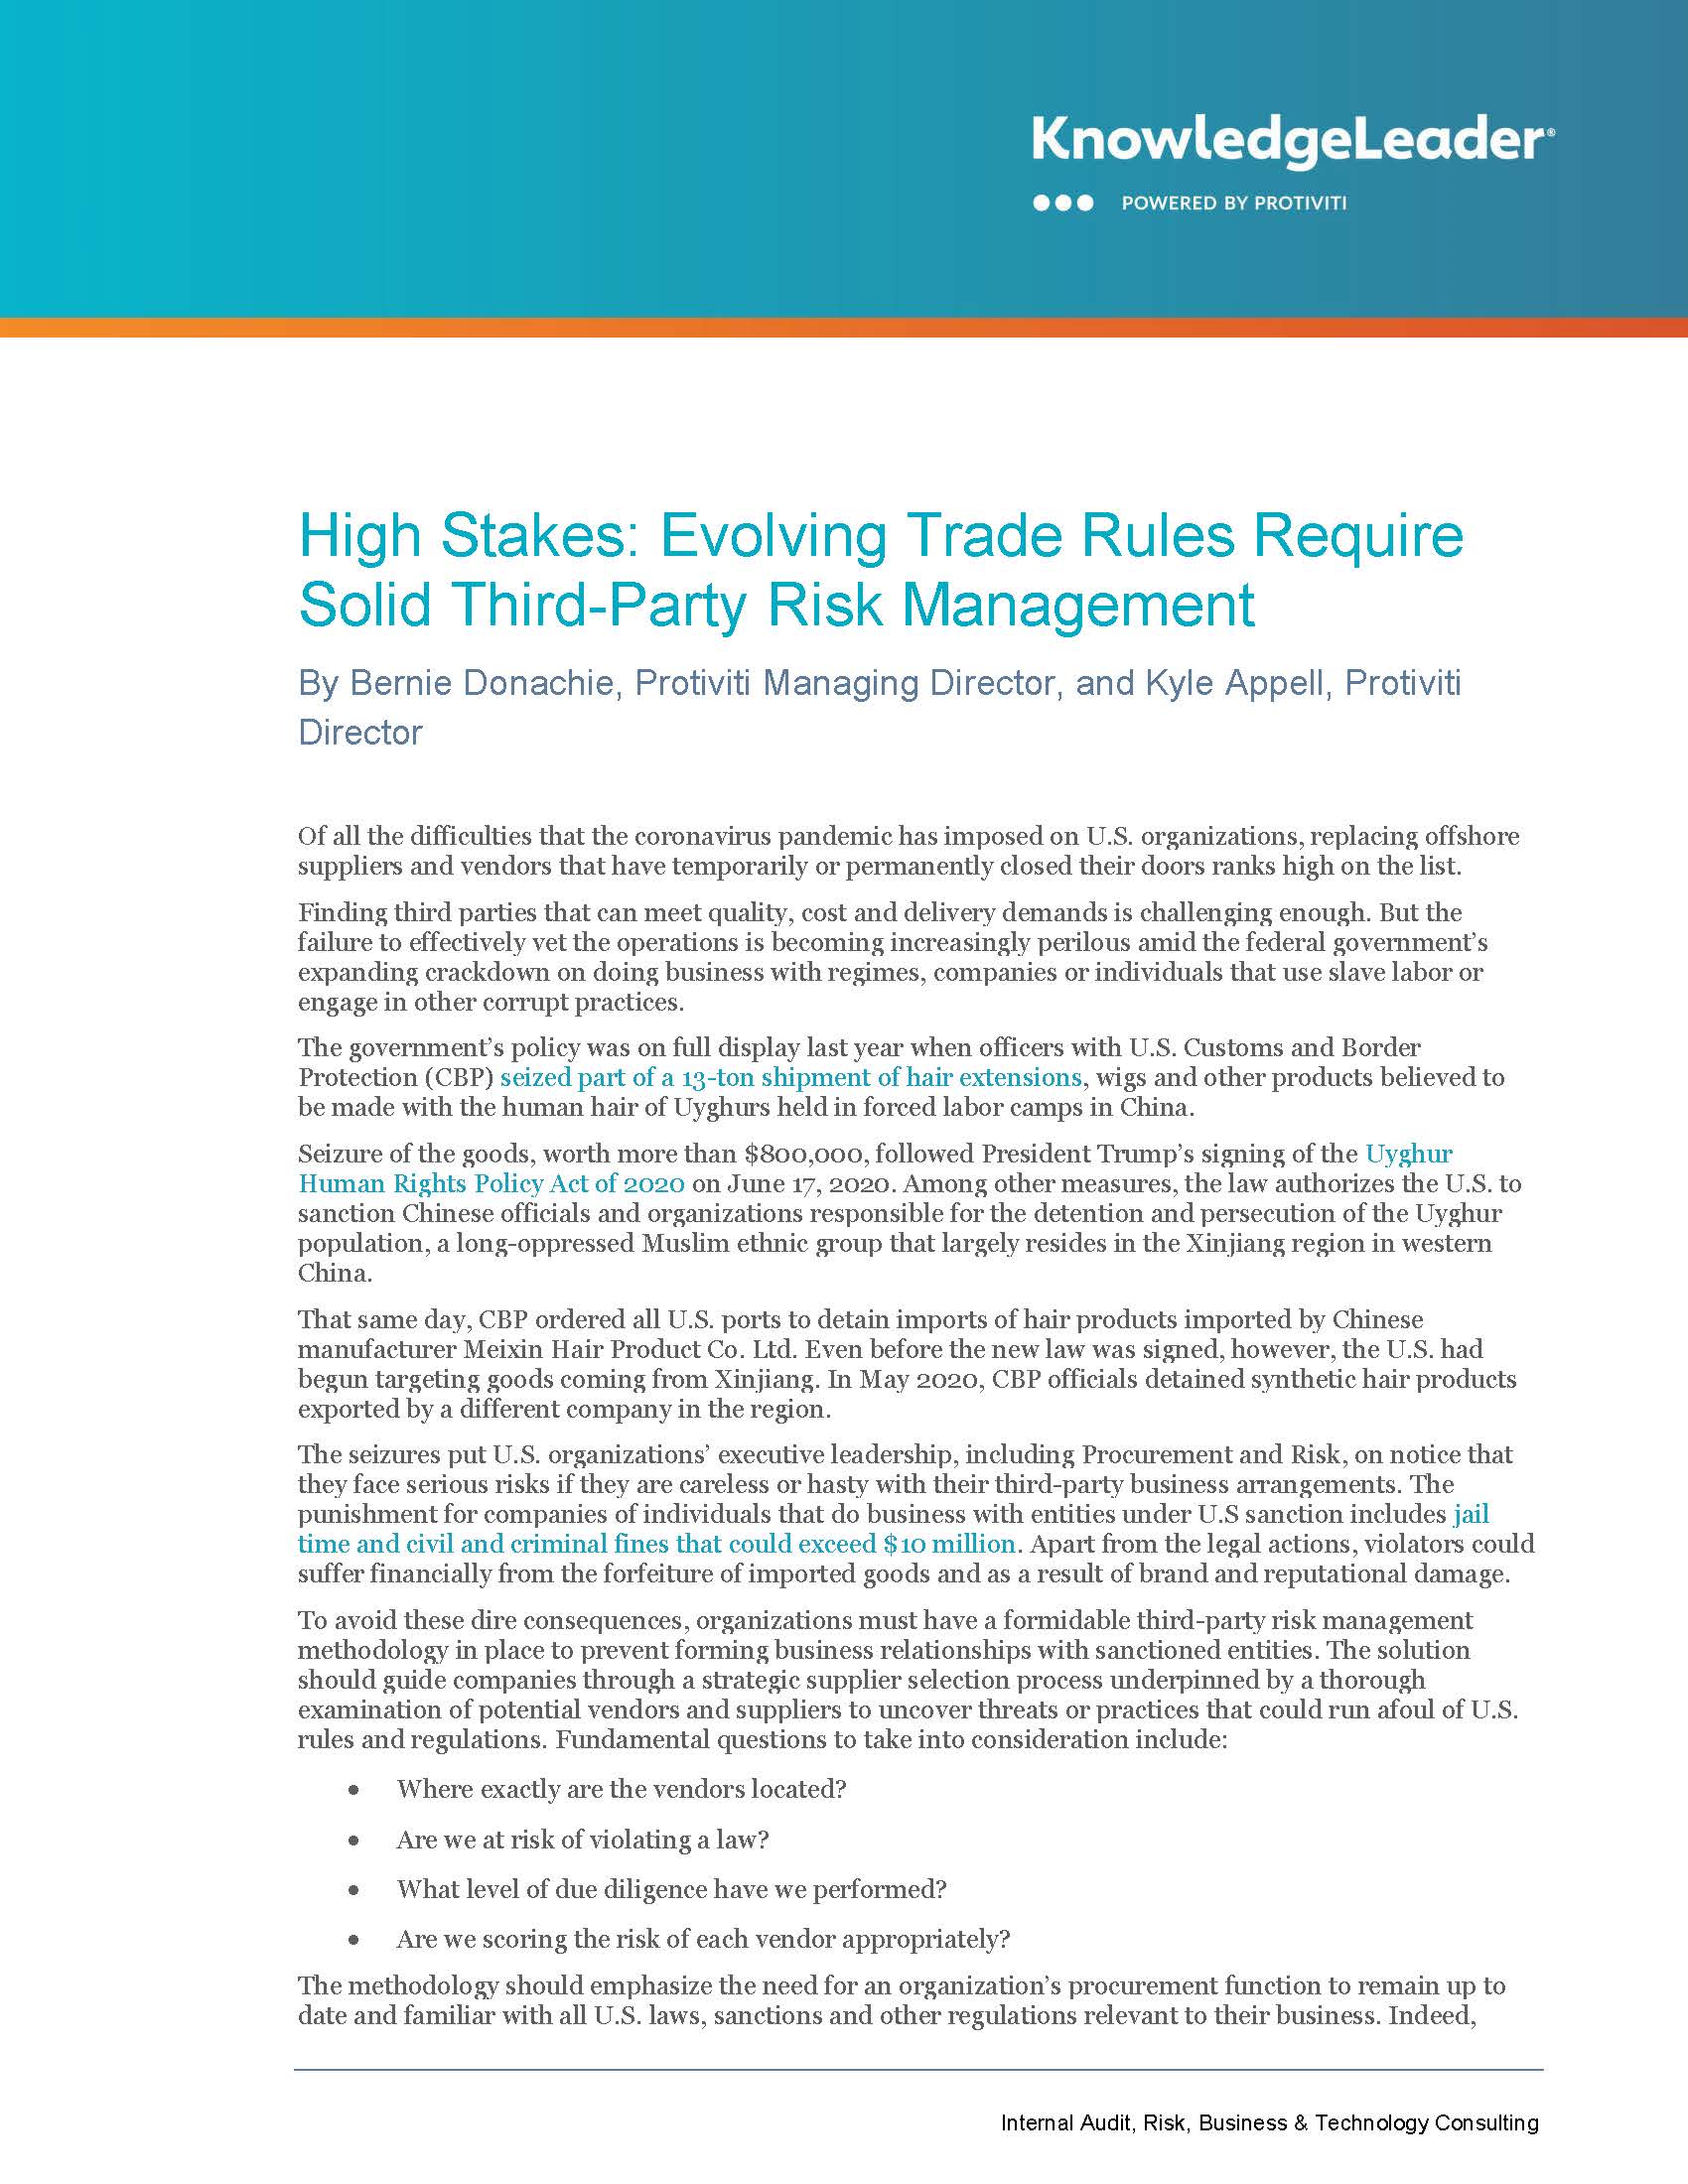 Screenshot of the first page of High Stakes: Evolving Trade Rules Require Solid Third-Party Risk Management